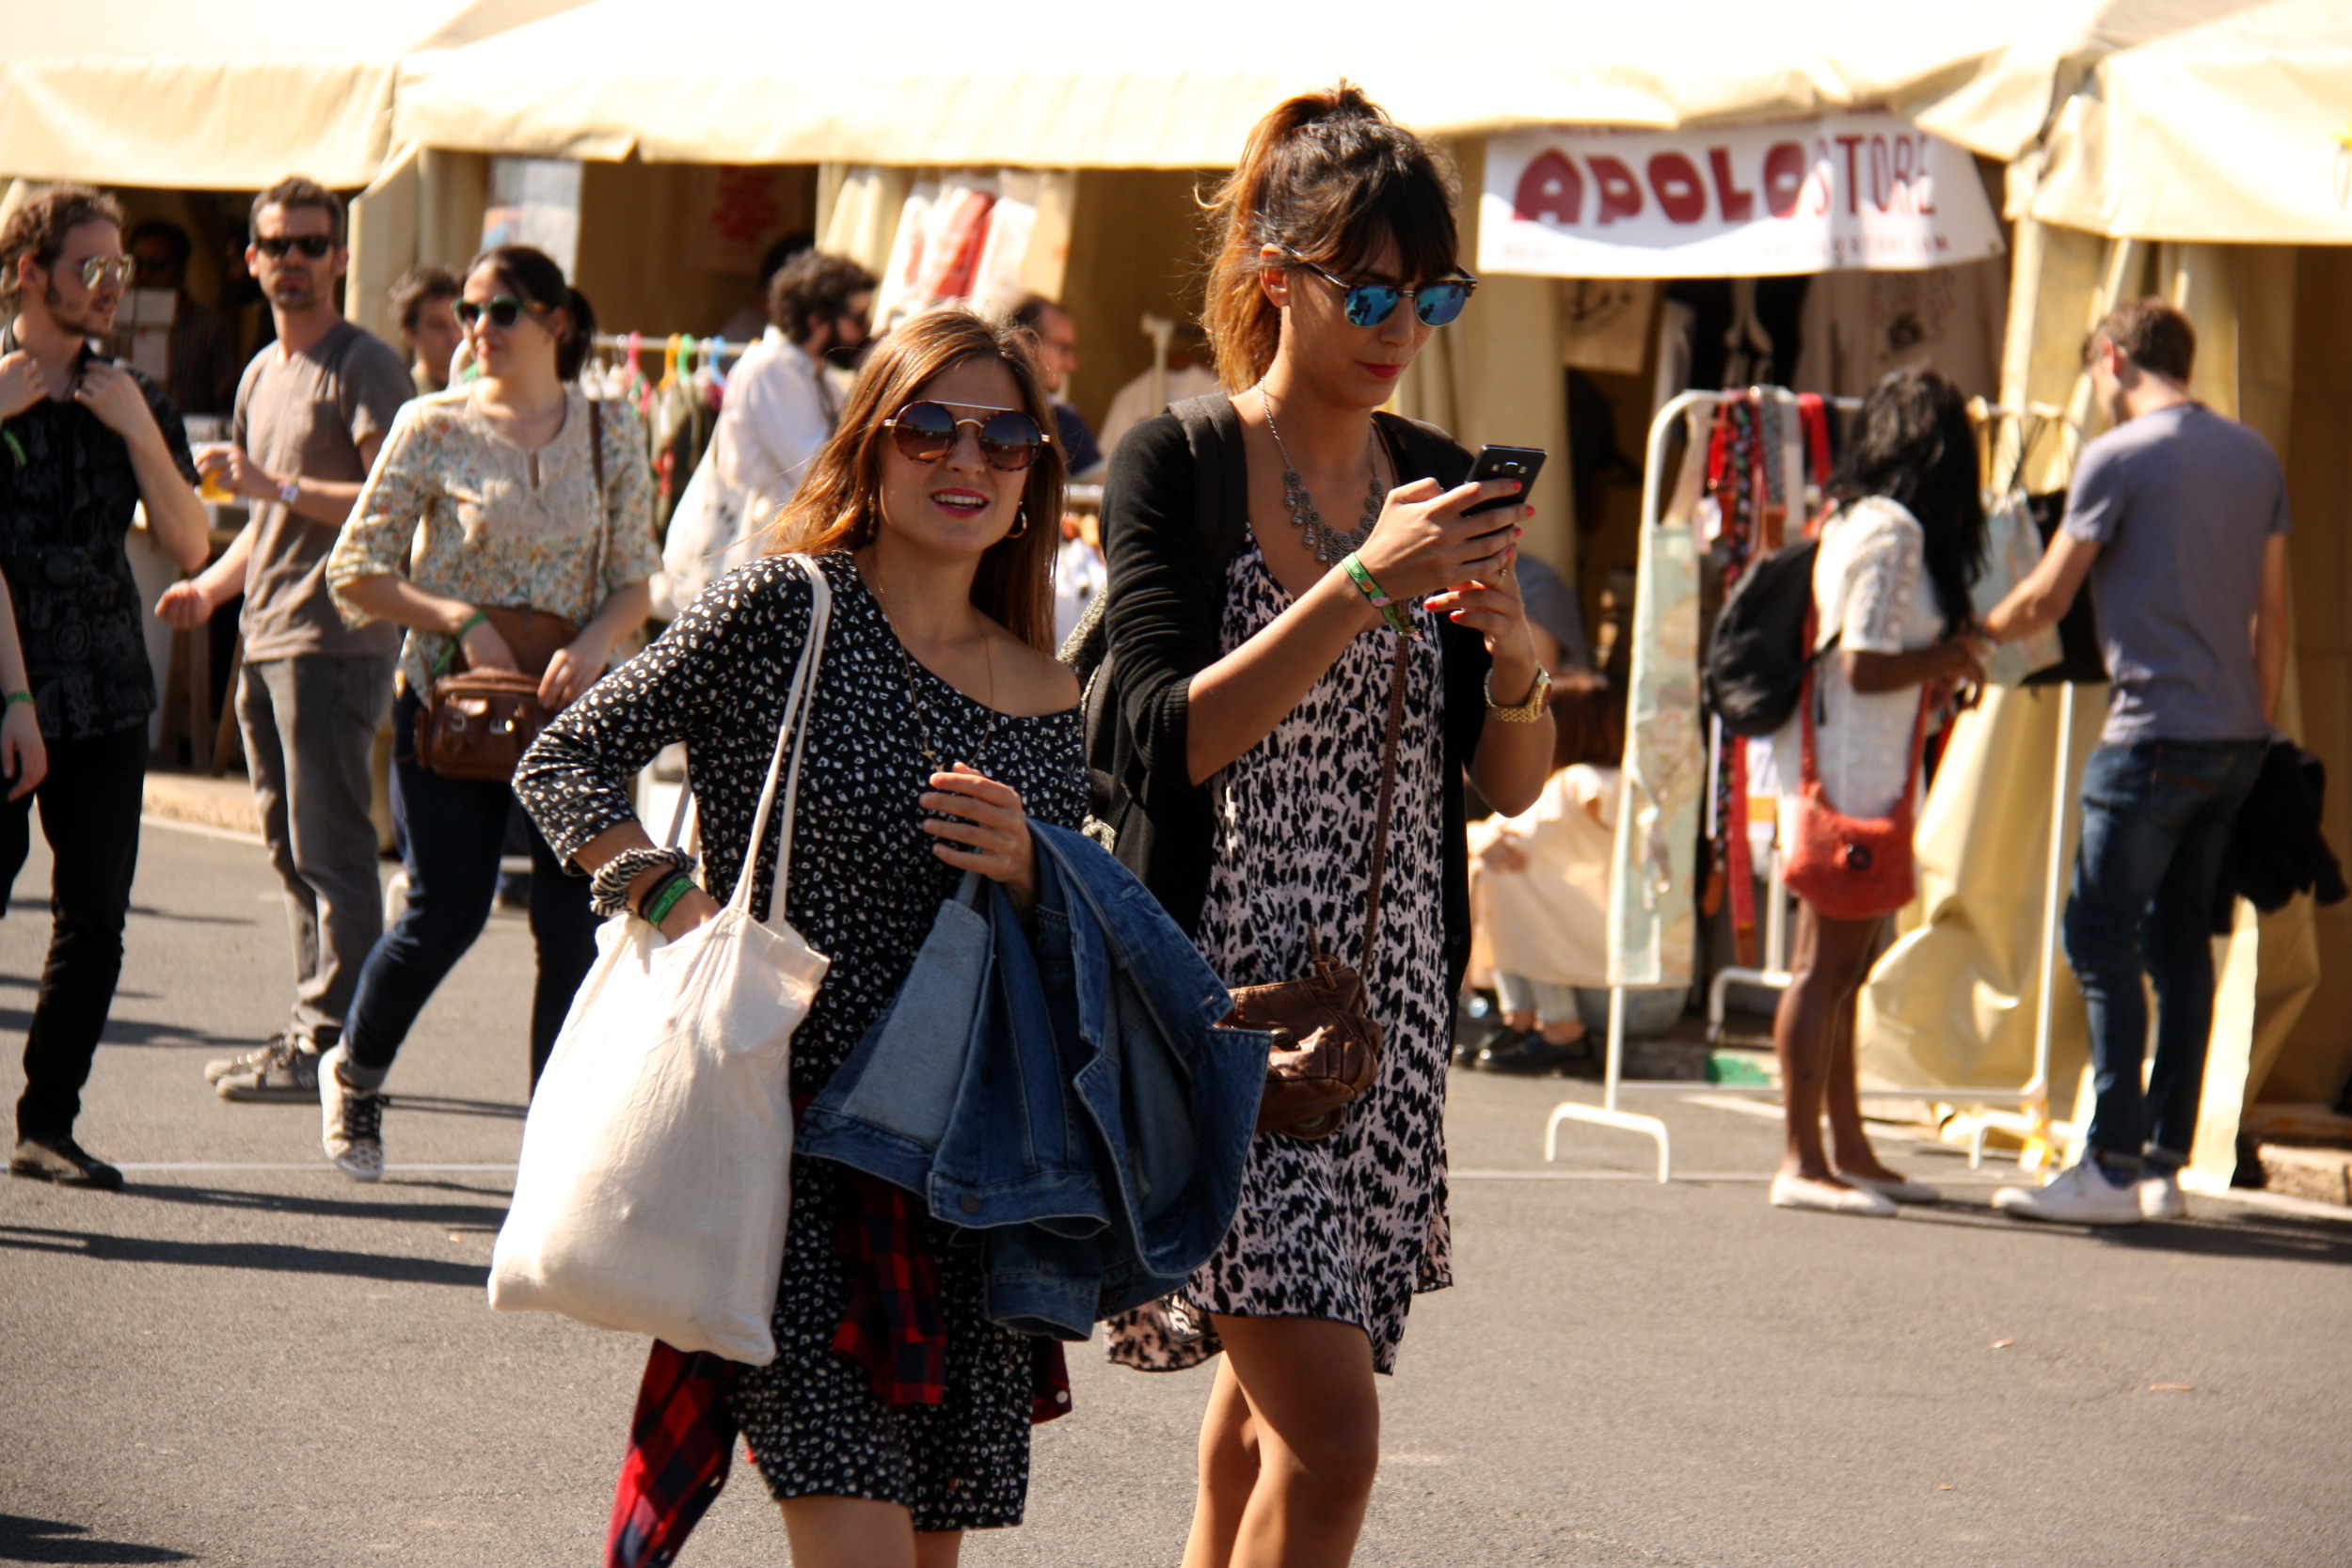 Two girls at Primavera Sound festival, at Barcelona's Parc del Fòrum (by ACN)